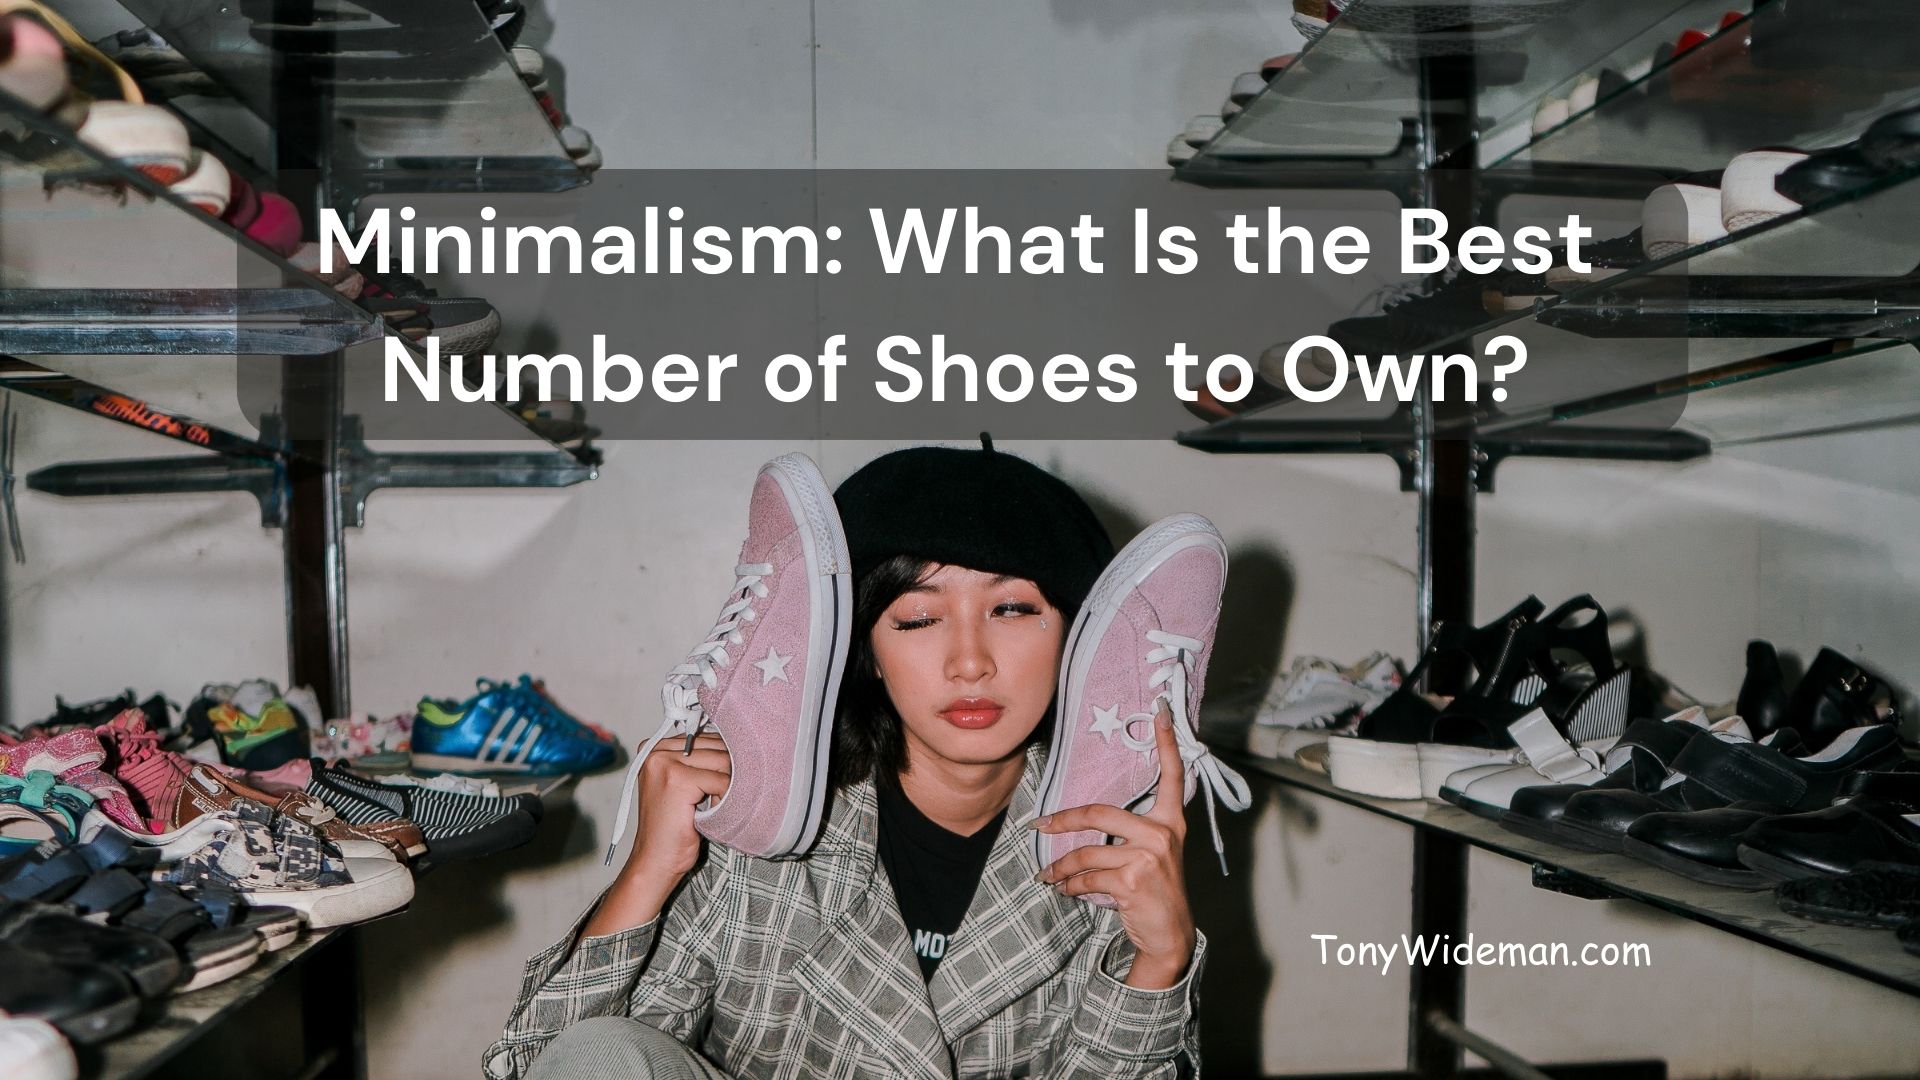 Minimalism: What Is The Best Number Of Shoes to Own?